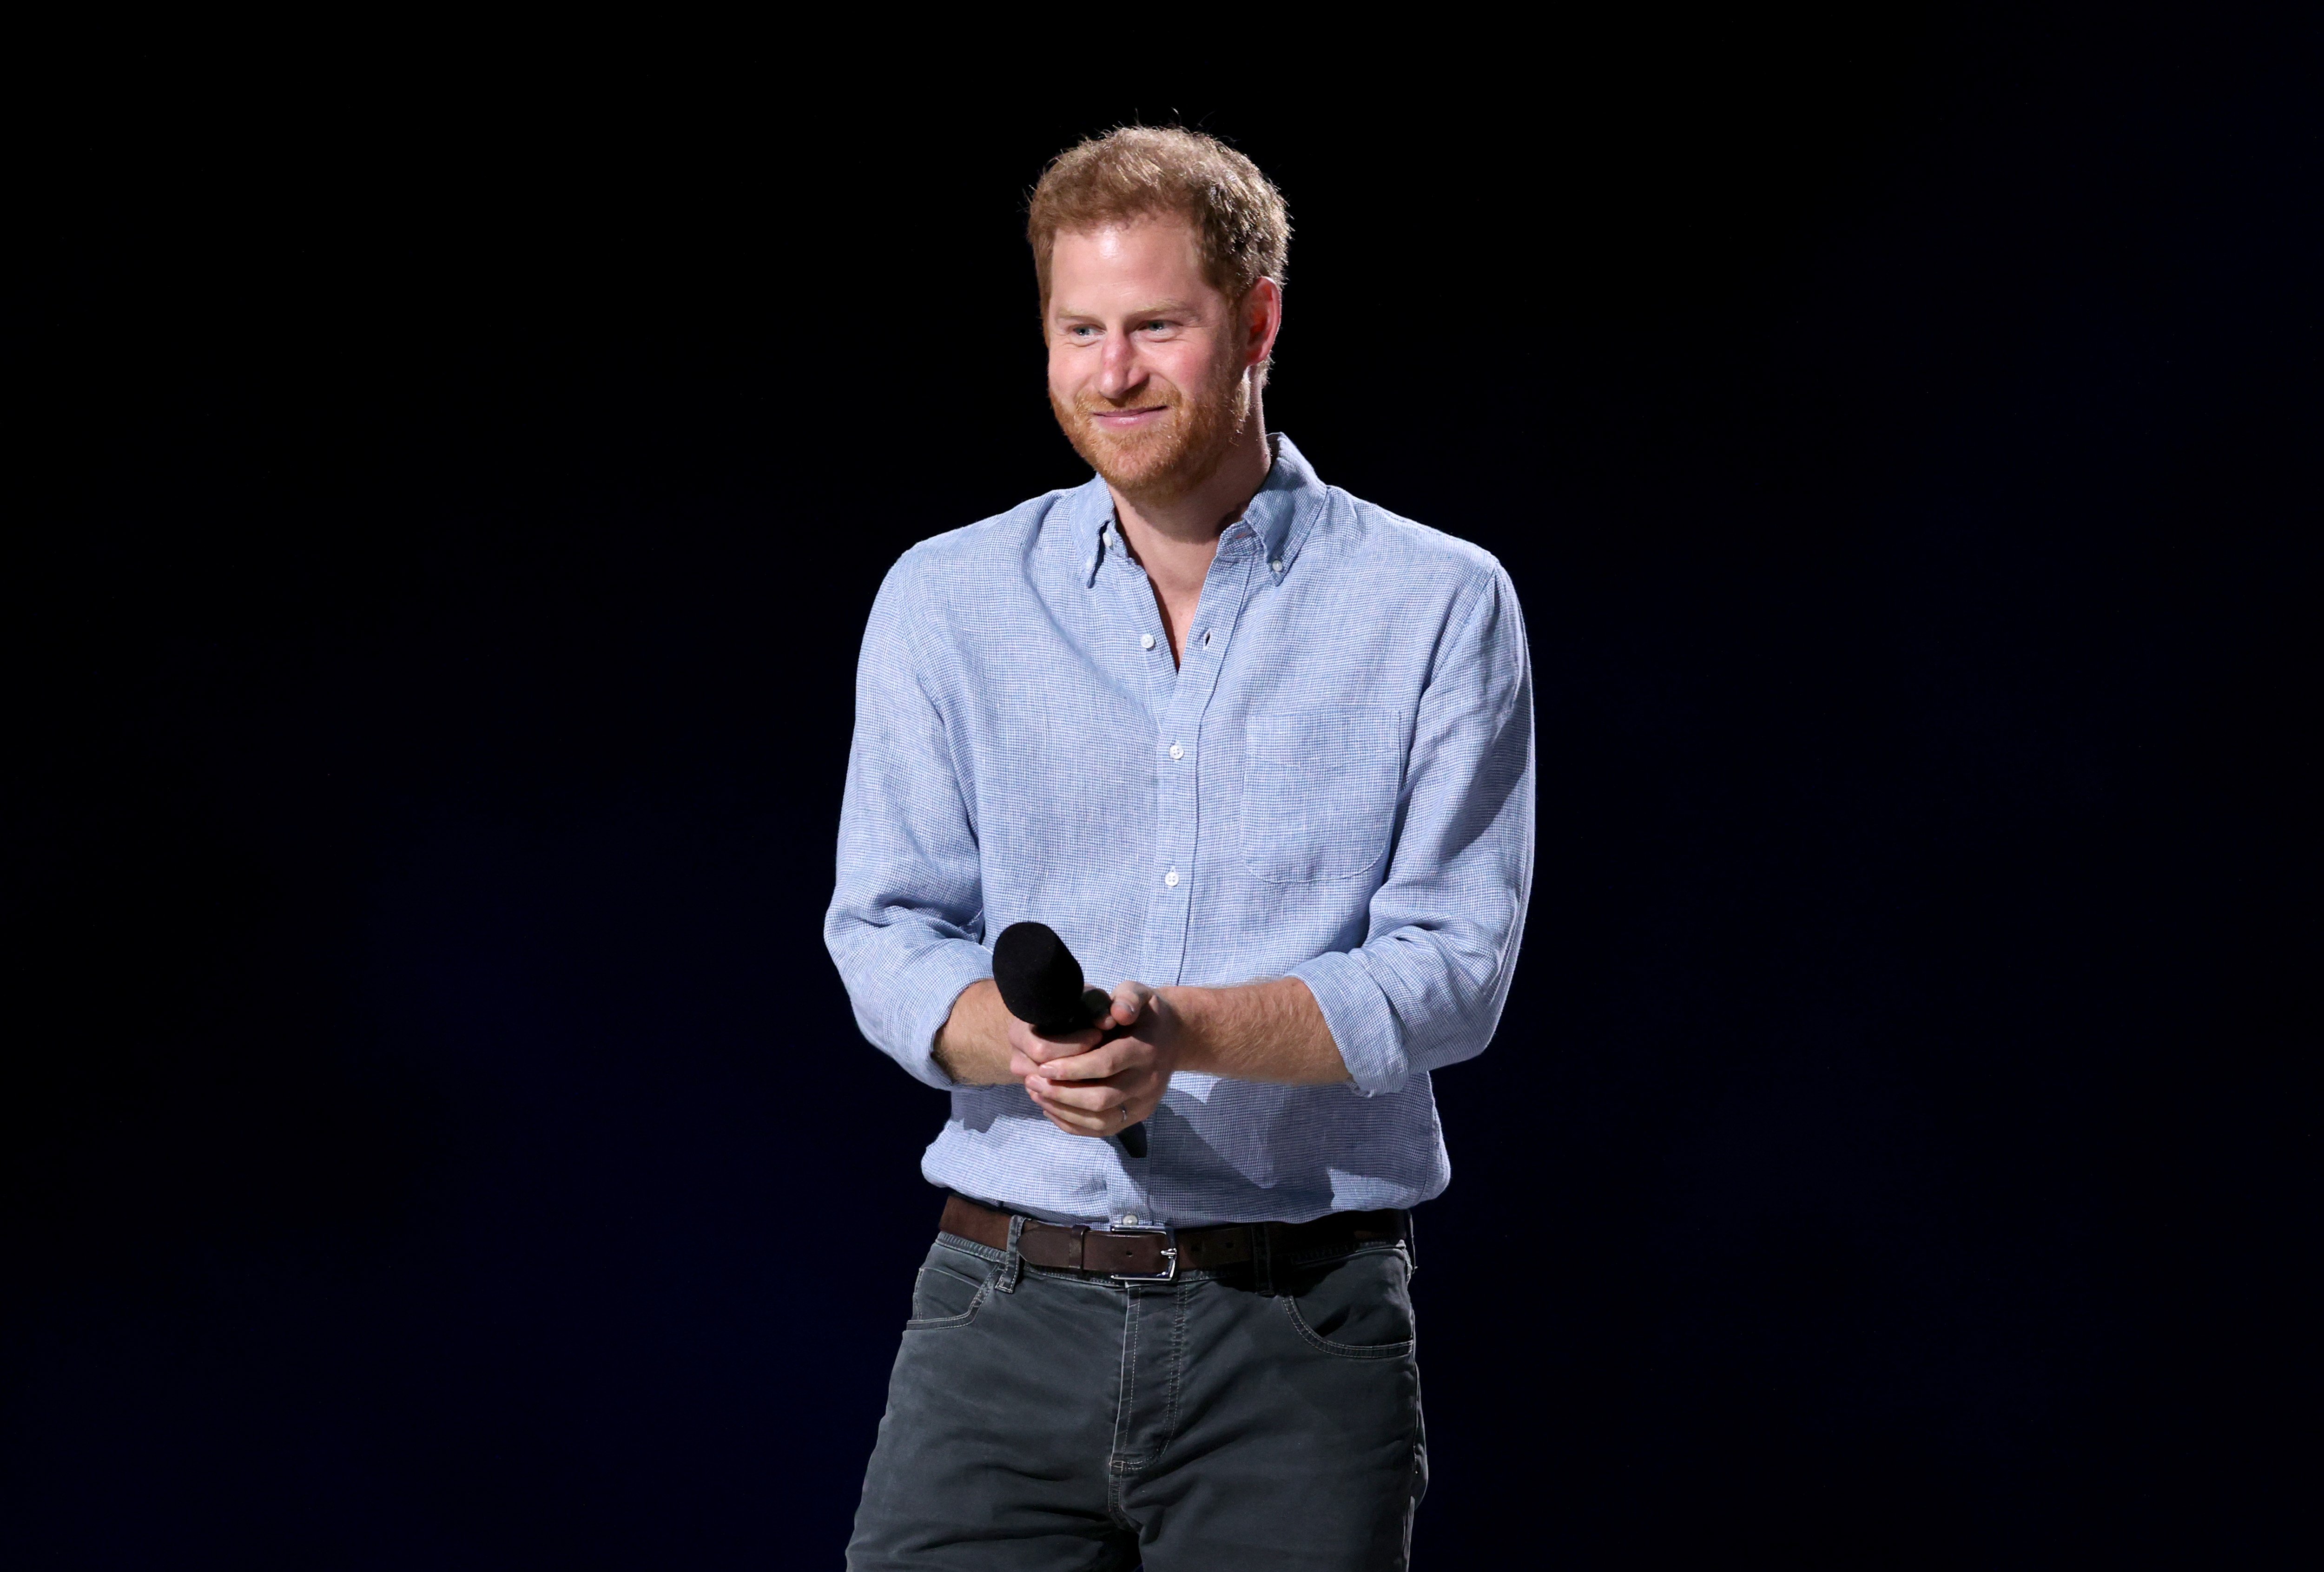 Prince Harry at the Global Citizen VAX LIVE: The Concert To Reunite The World will be broadcast on May 8, 2021.| Source: Getty Images